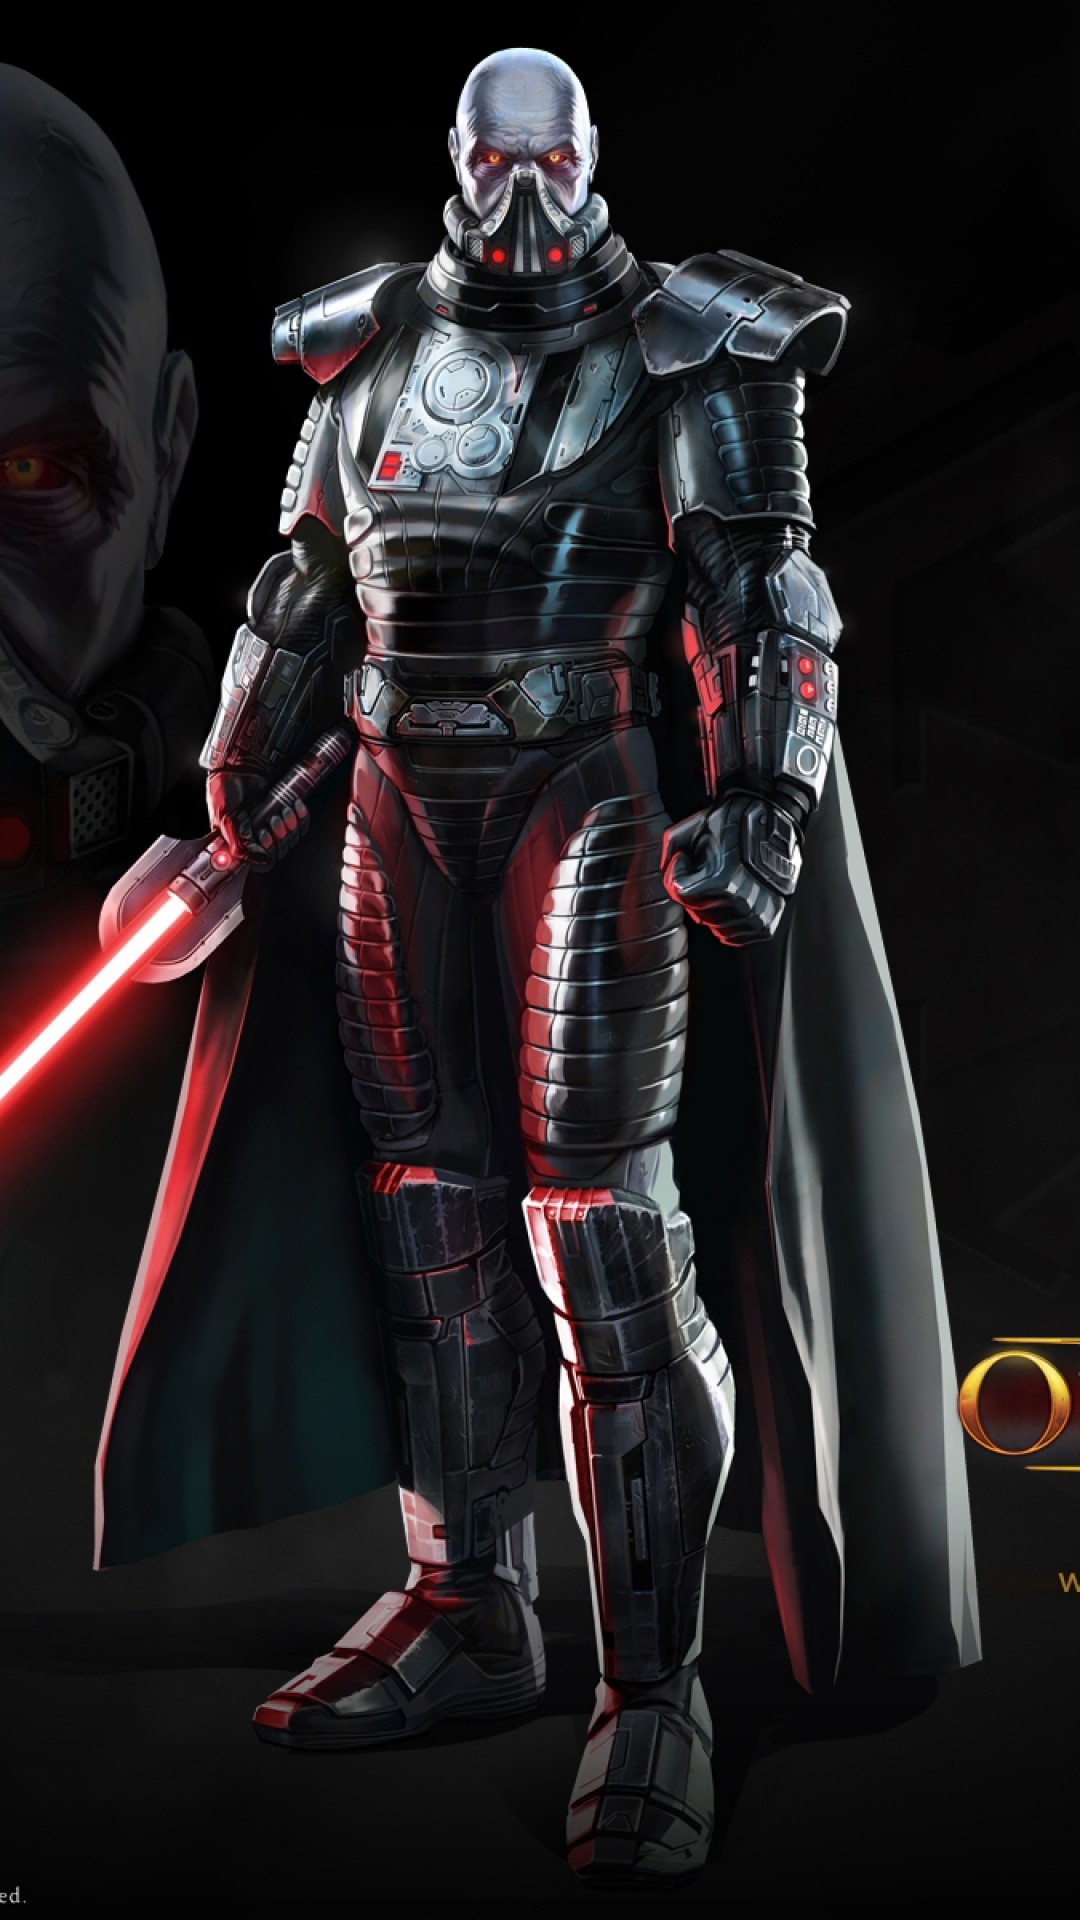 1080x1920 Download Wallpaper  Star wars the old republic, Sith .